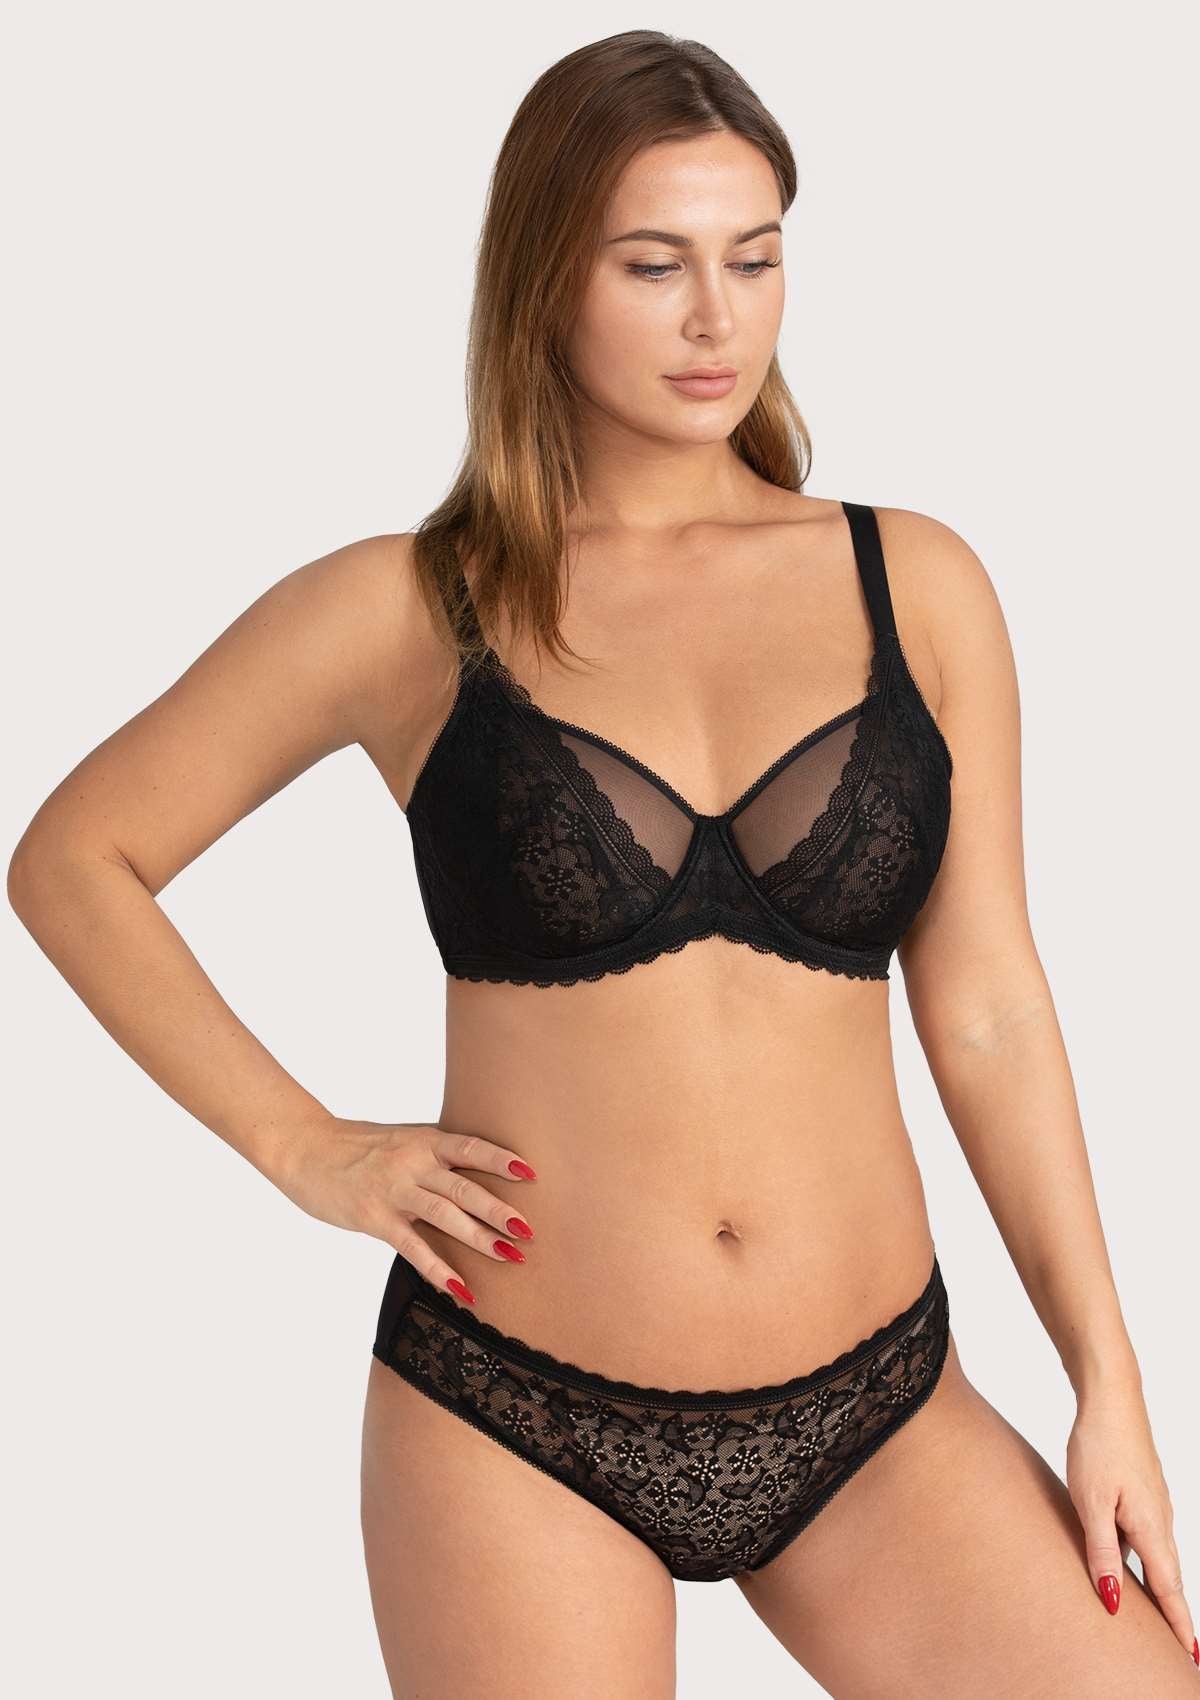 HSIA Anemone Lace Bra And Panties: Back Support Wired Bra - Black / 40 / D